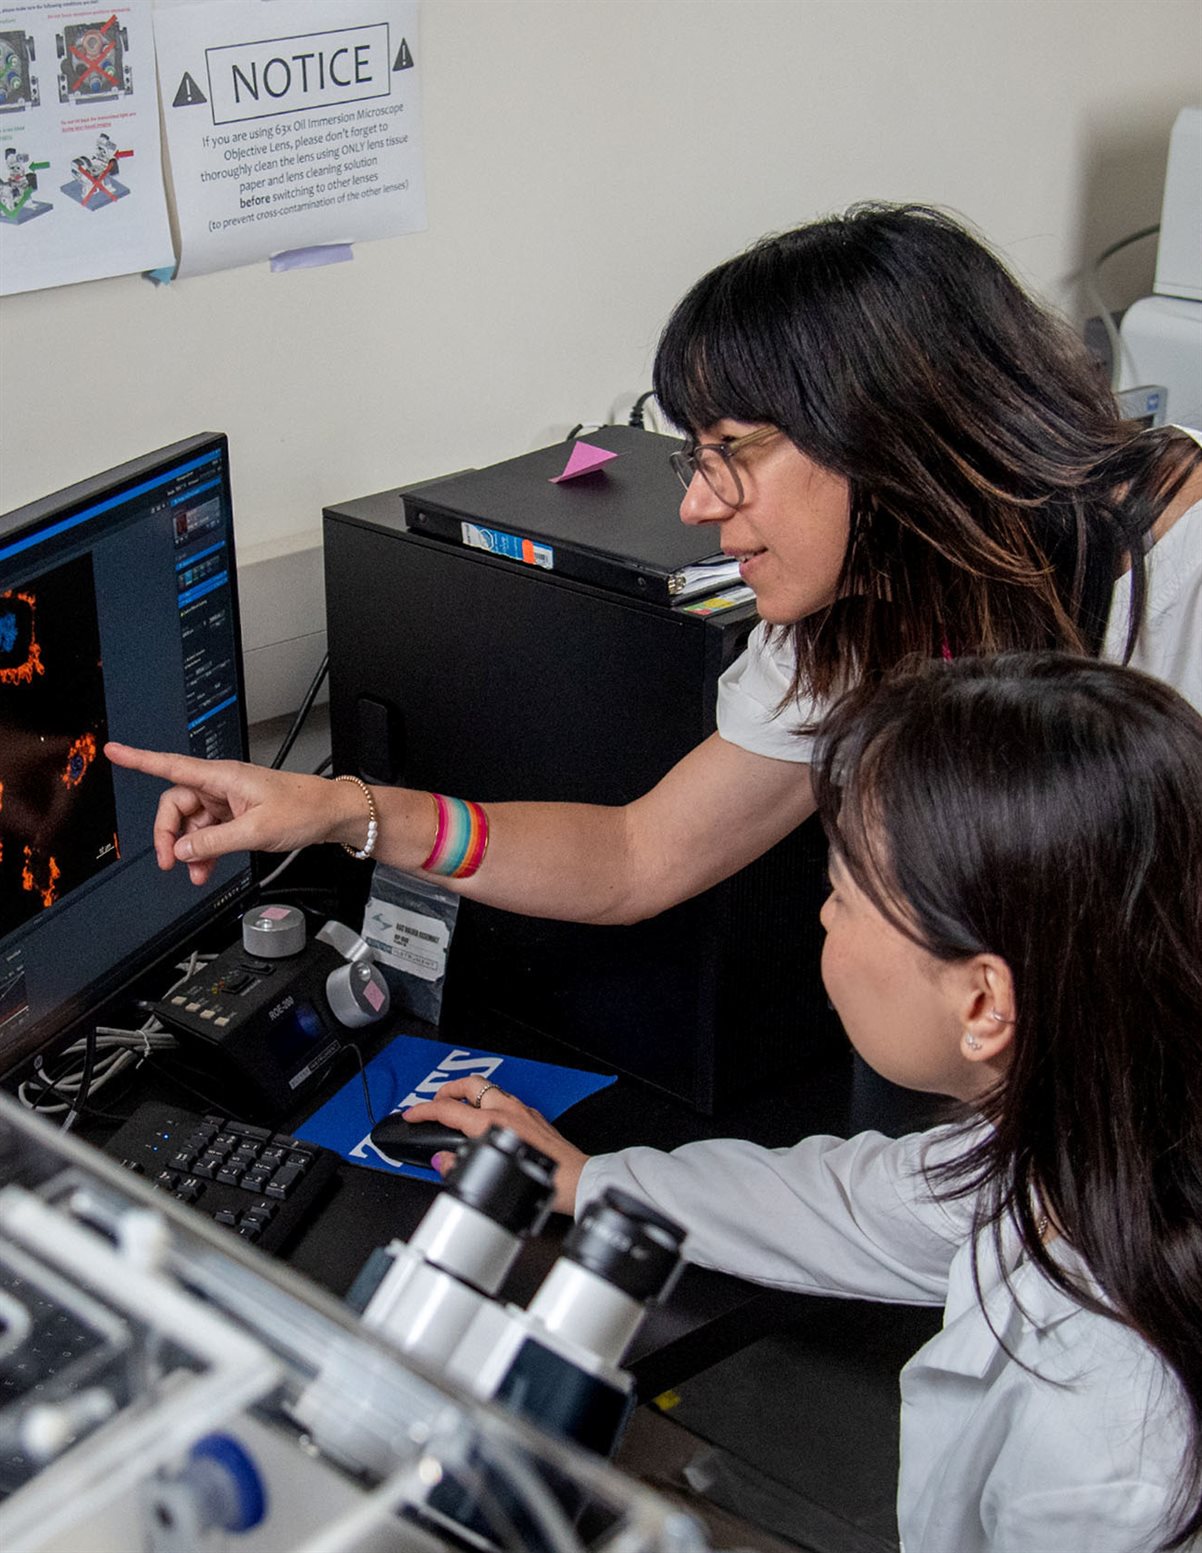 Materials Science and Engineering professor Cecilia Leal works with graduate students in a lab at MSEB in April 2023. Prof. Leal is pictured with graduate student, Nurila Kambar.